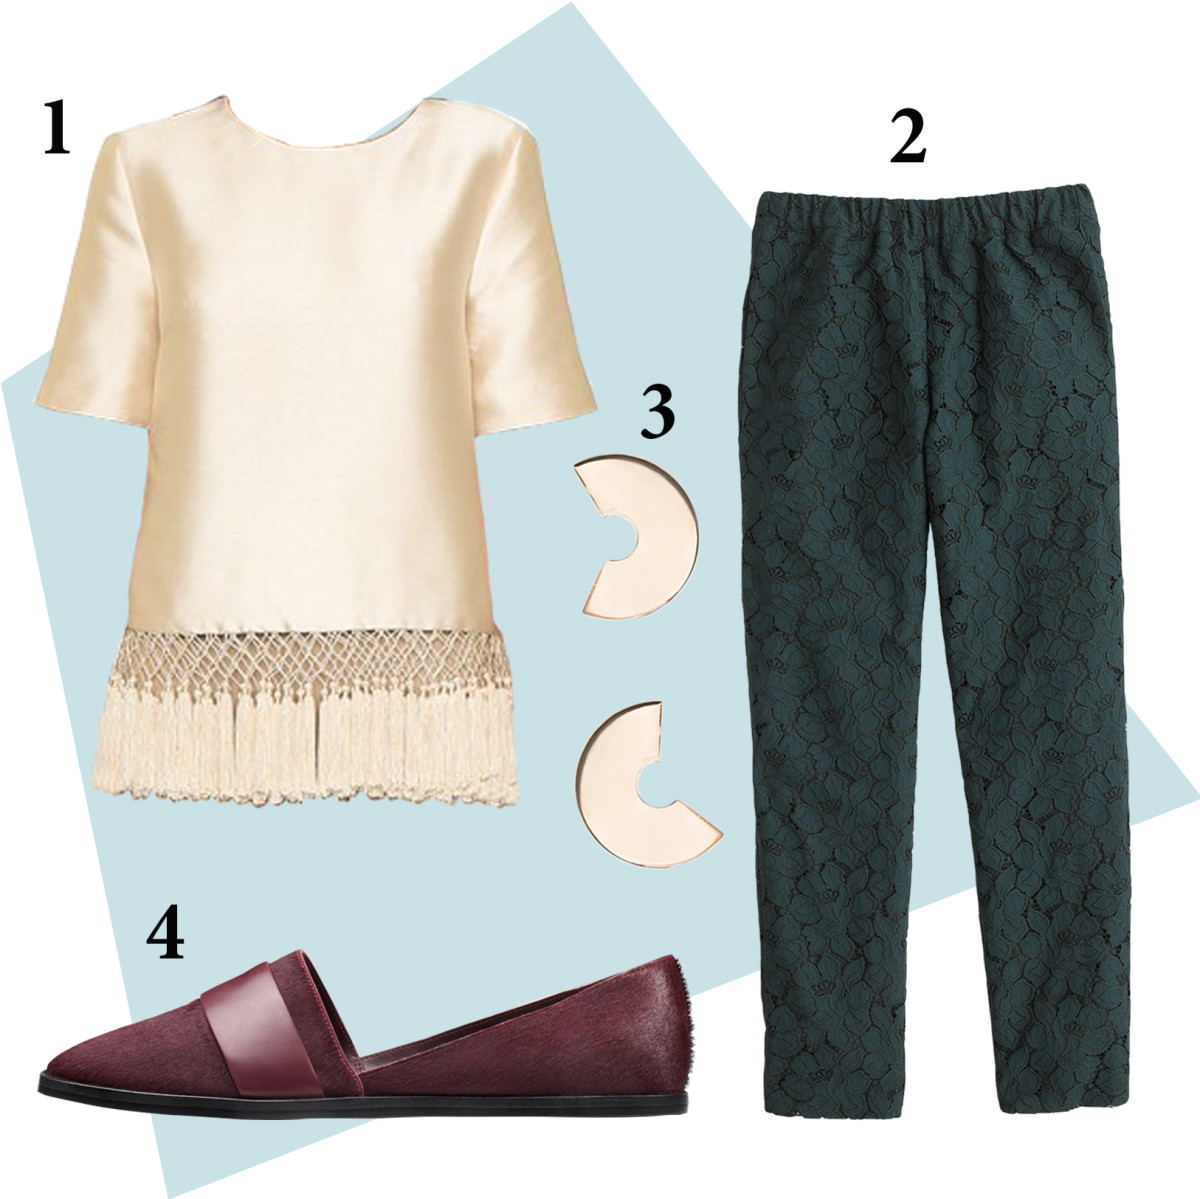 1 — C/Meo Collective top, $231, available at Shopbop and BNKR; 2 — J.Crew floral lace pants, now $99, available at J.Crew; 3— Faris disco hoops, $125, available Need Supply Co; 4 — Vince haircalf flat, $275, available at Vince. 